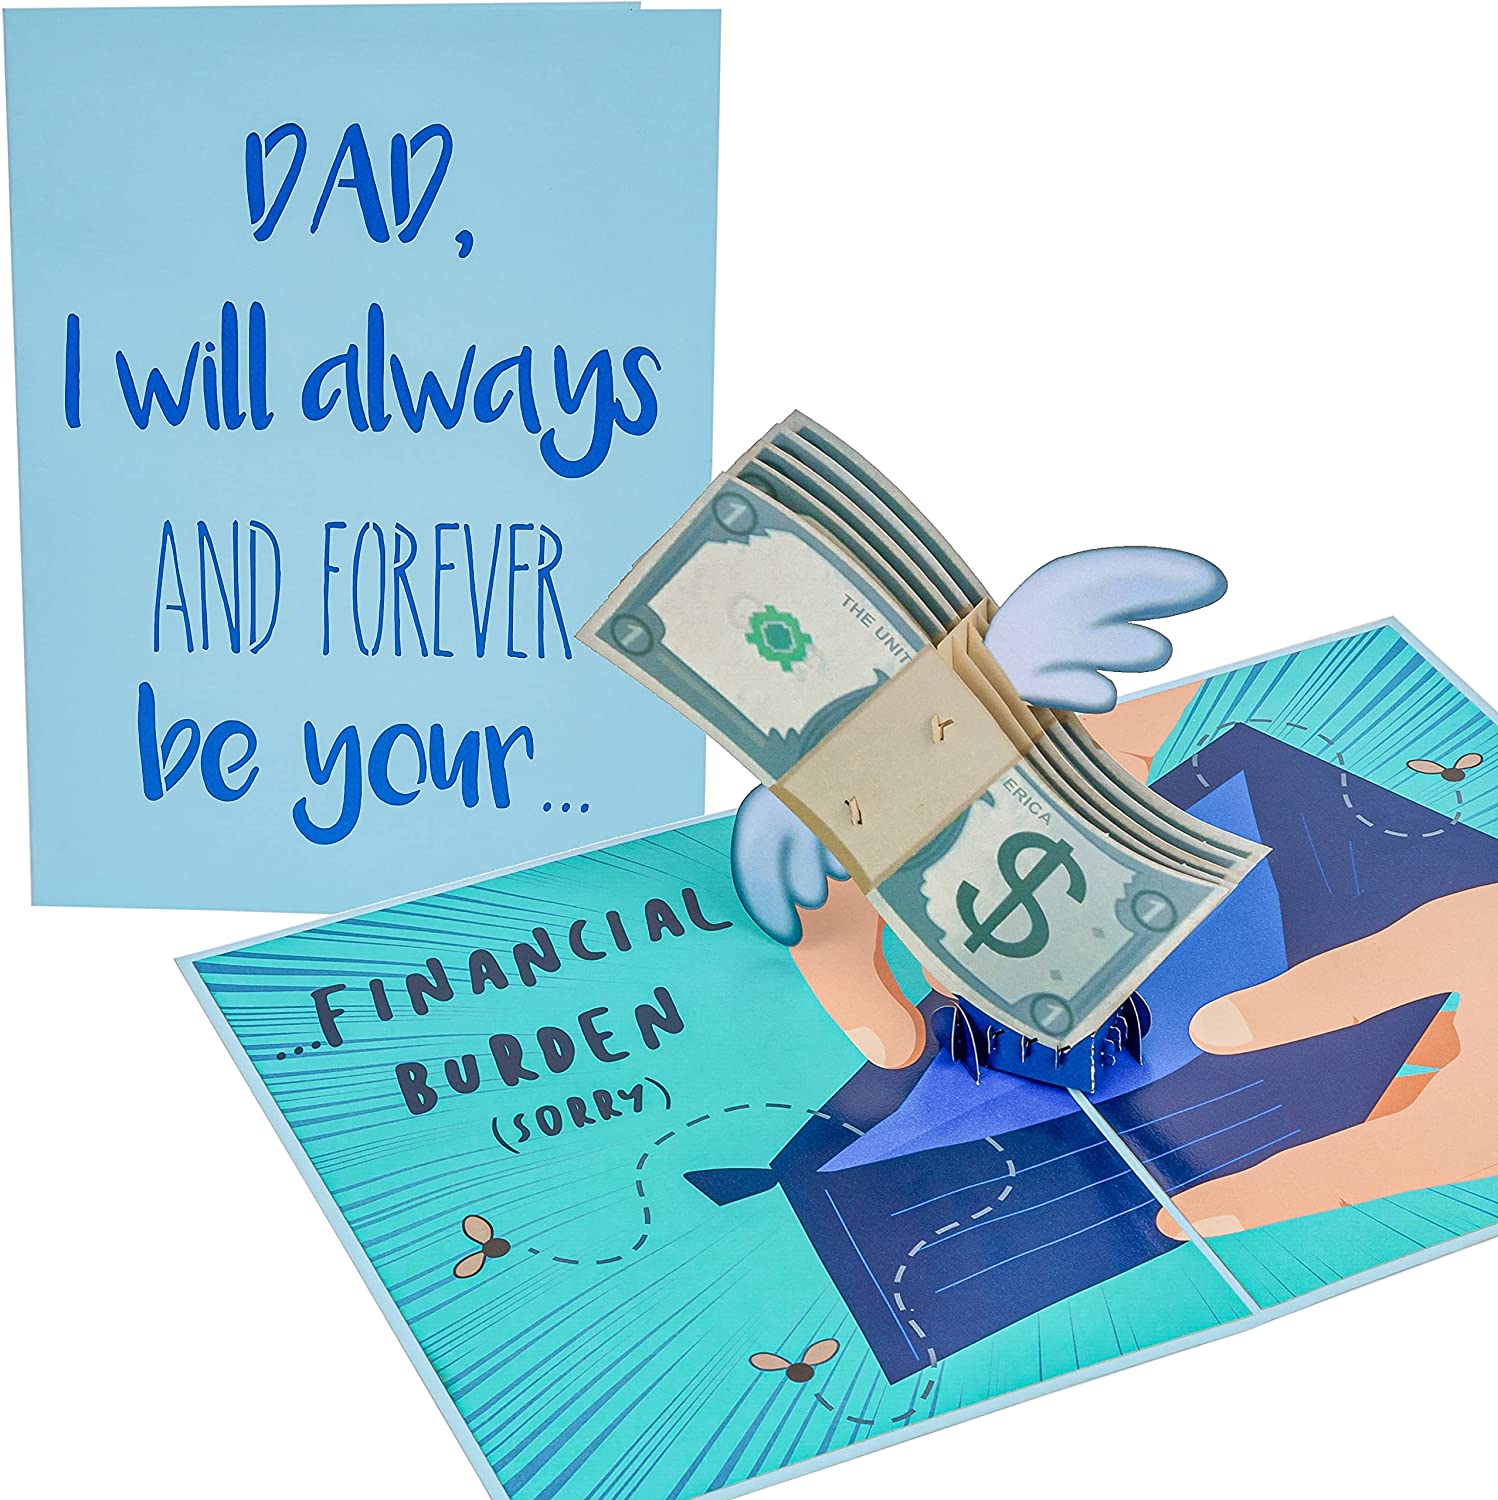 Pop up card of a wallet and words “Dad, I’ll always and forever be your financial burden”